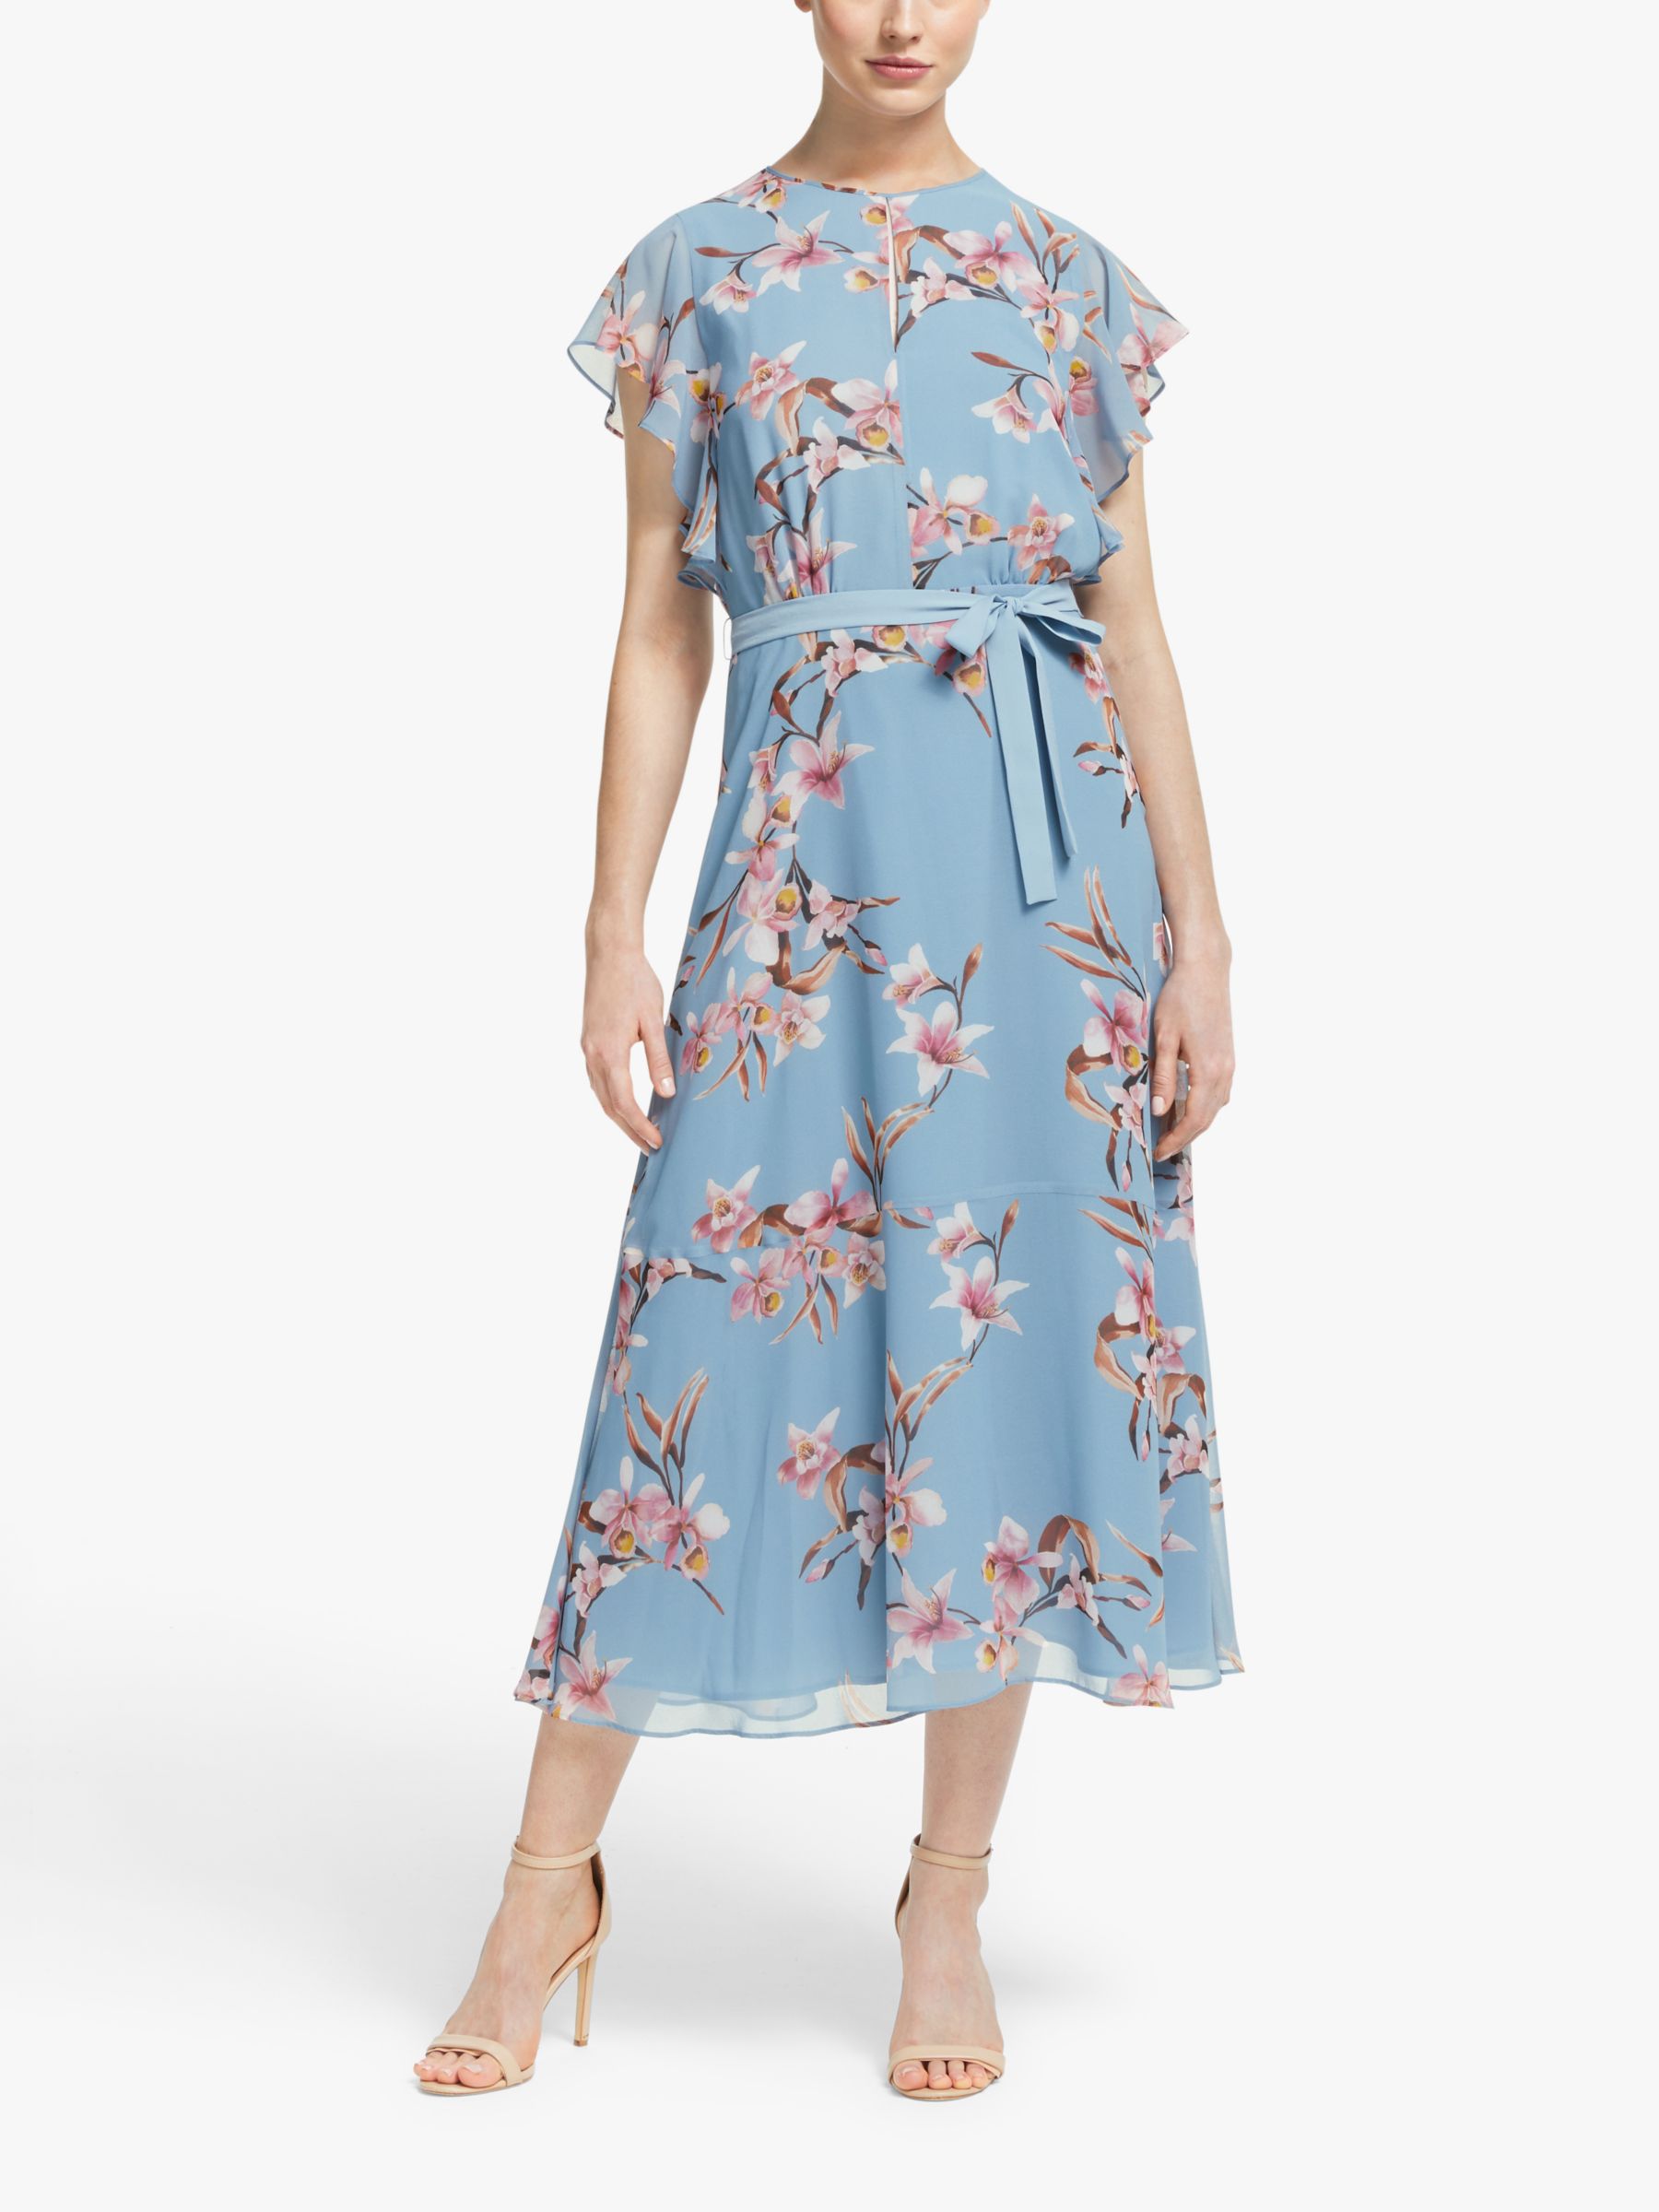 light blue floral dress with sleeves